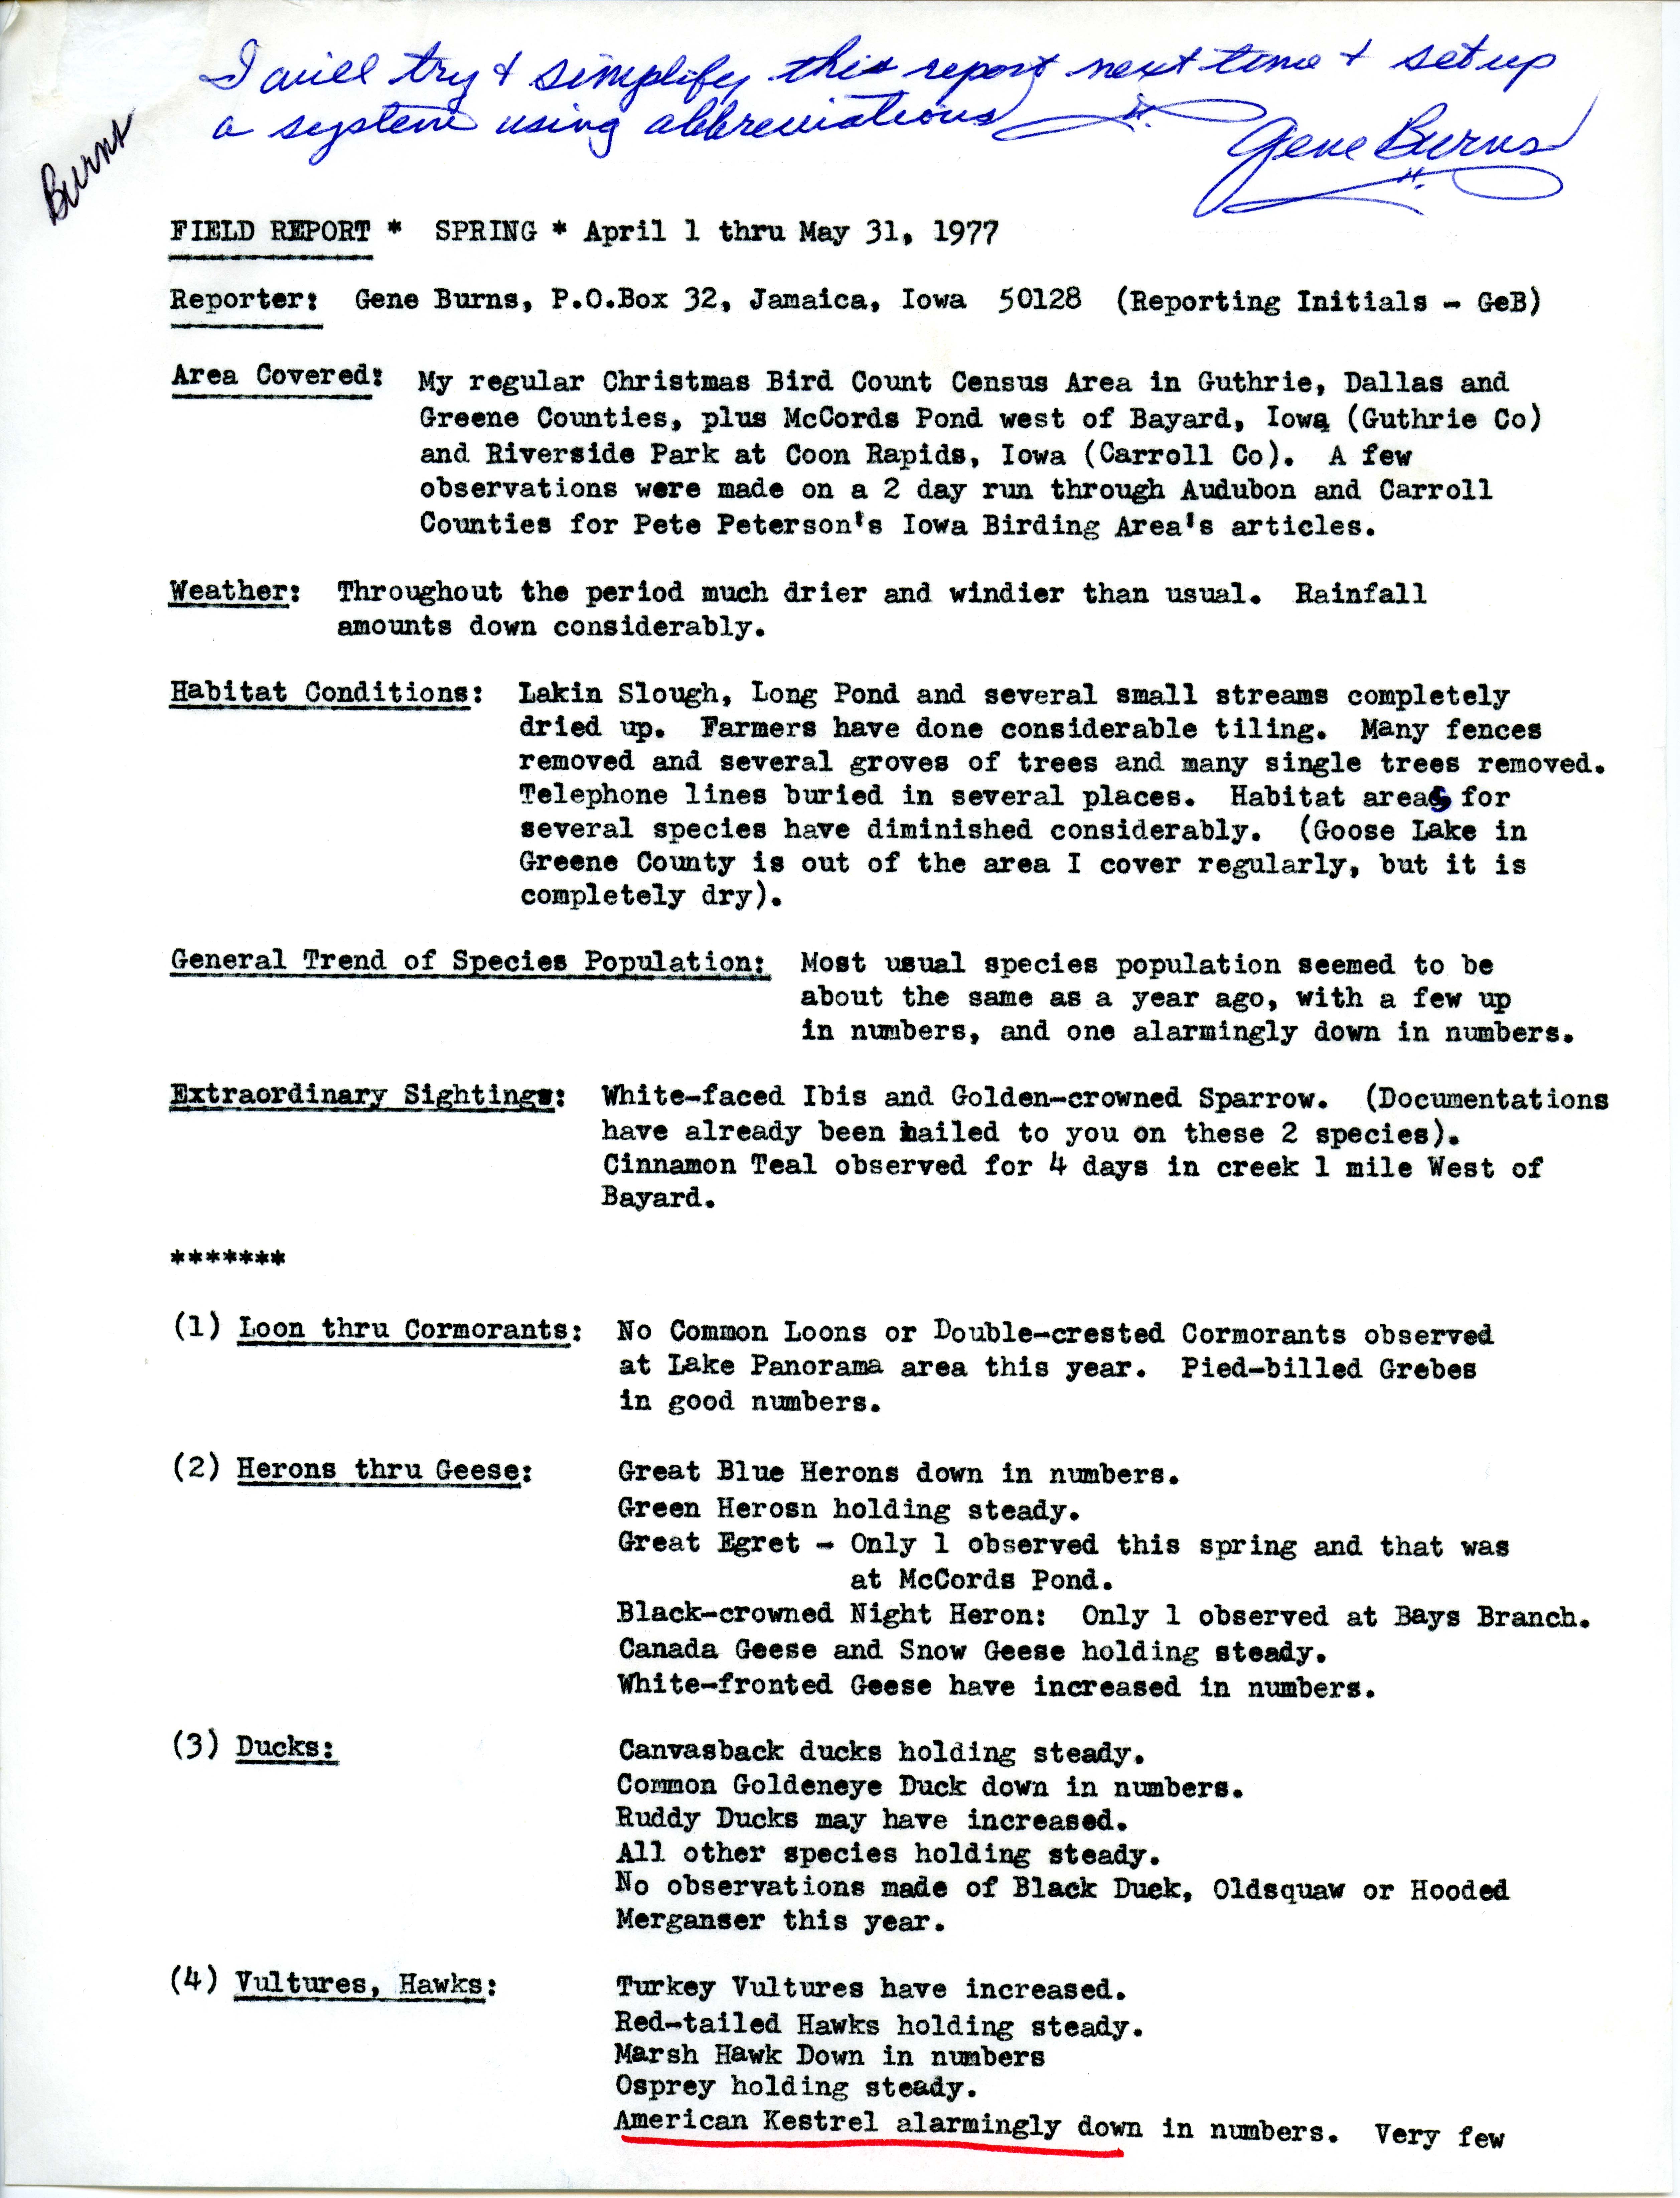 Field report for Spring, April 1 to May 31, 1977